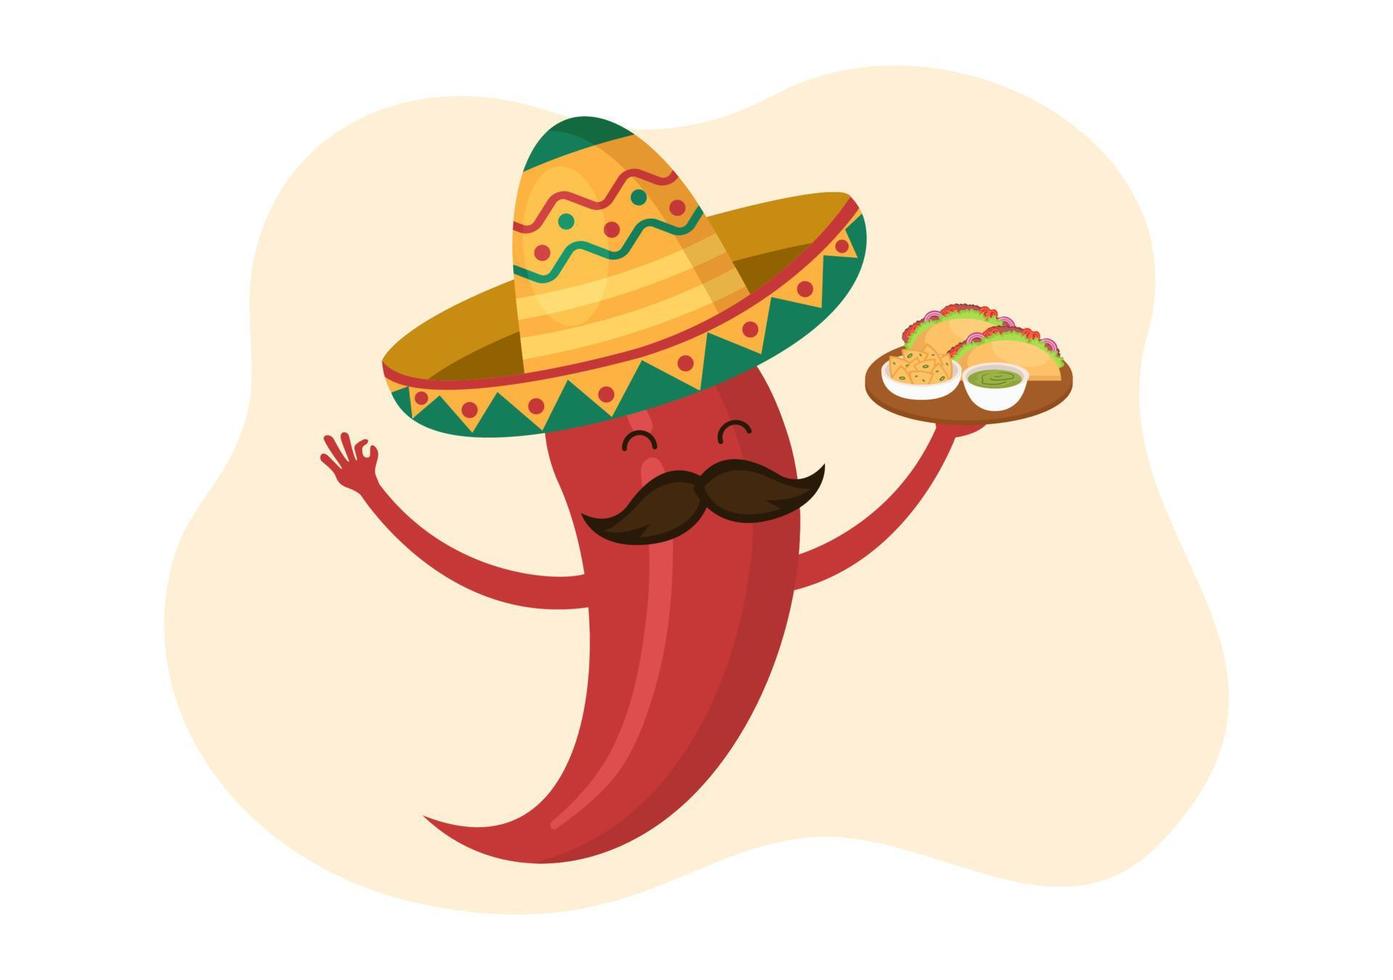 Mexican Food Restaurant with Various of Delicious Traditional Cuisine Tacos, Nachos and Other on Flat Cartoon Hand Drawn Templates Illustration vector